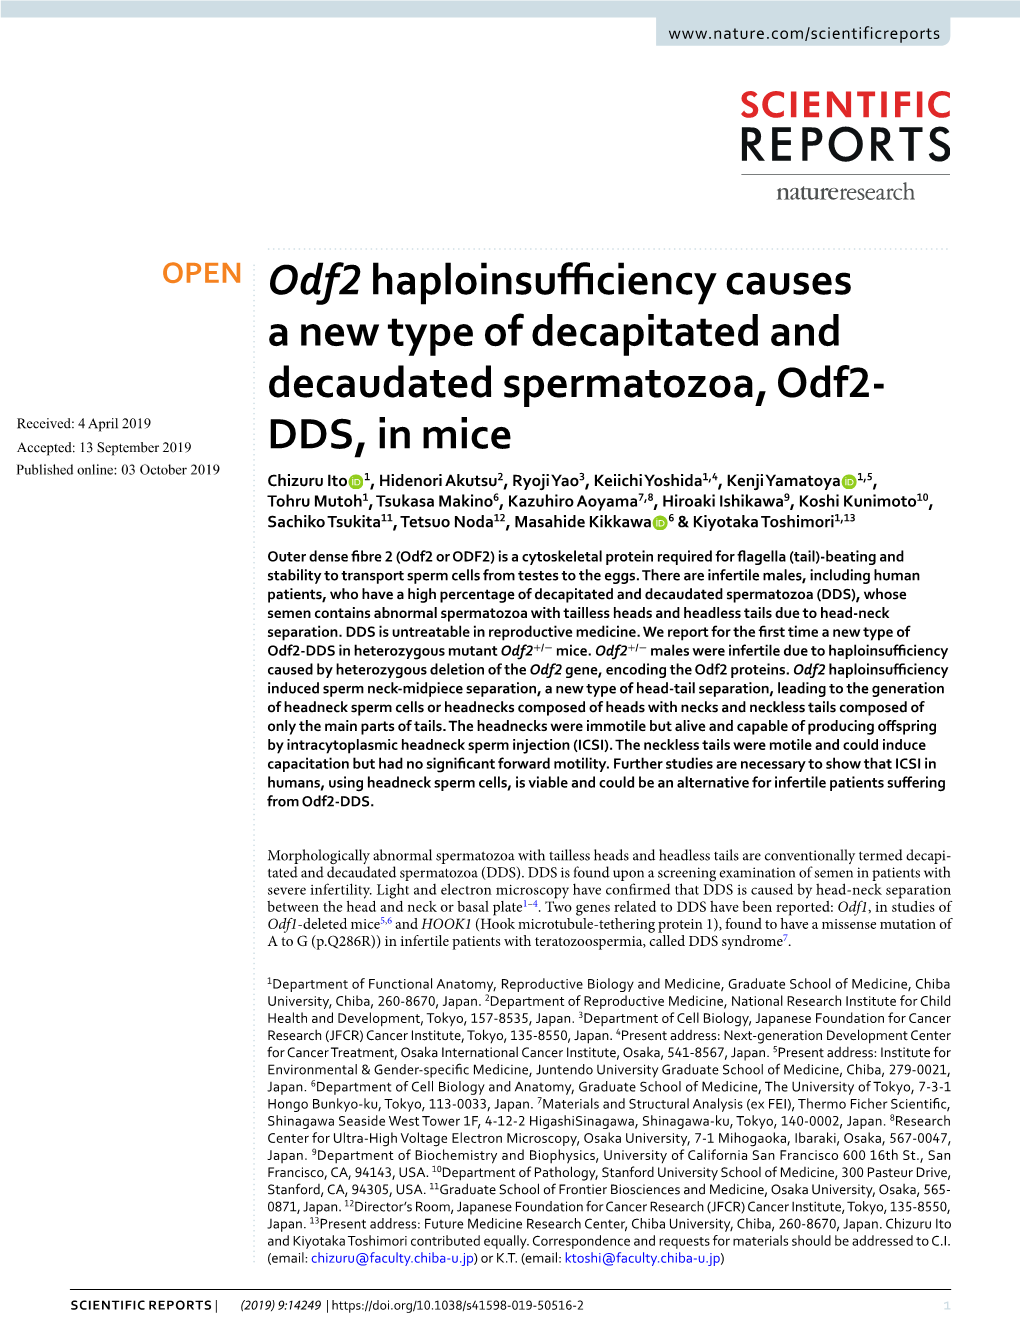 Odf2 Haploinsufficiency Causes a New Type of Decapitated and Decaudated Spermatozoa, Odf2-DDS, in Mice